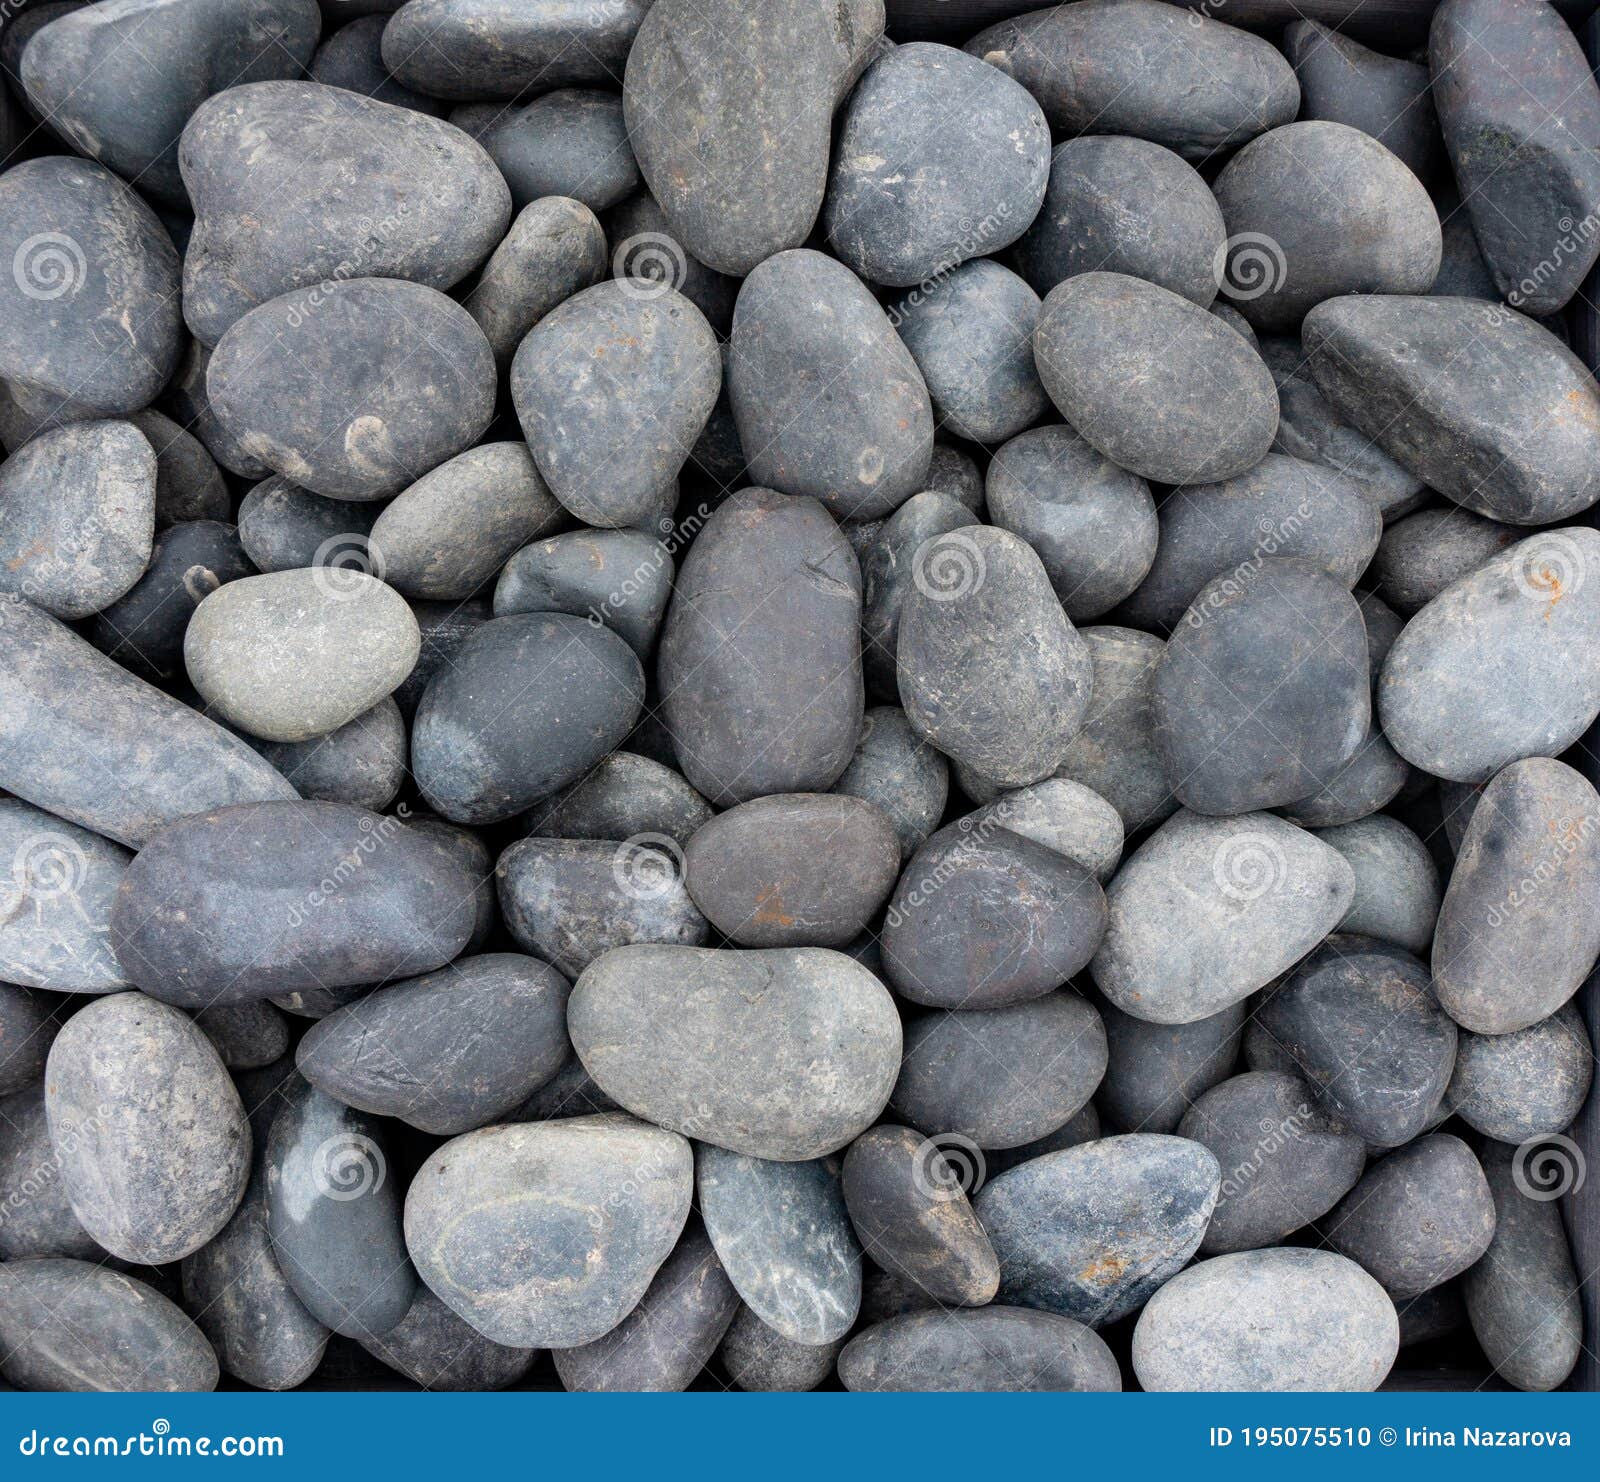 lucido nero black natural pebble background. texture of black smooth stones. natural pebbles for landscaping